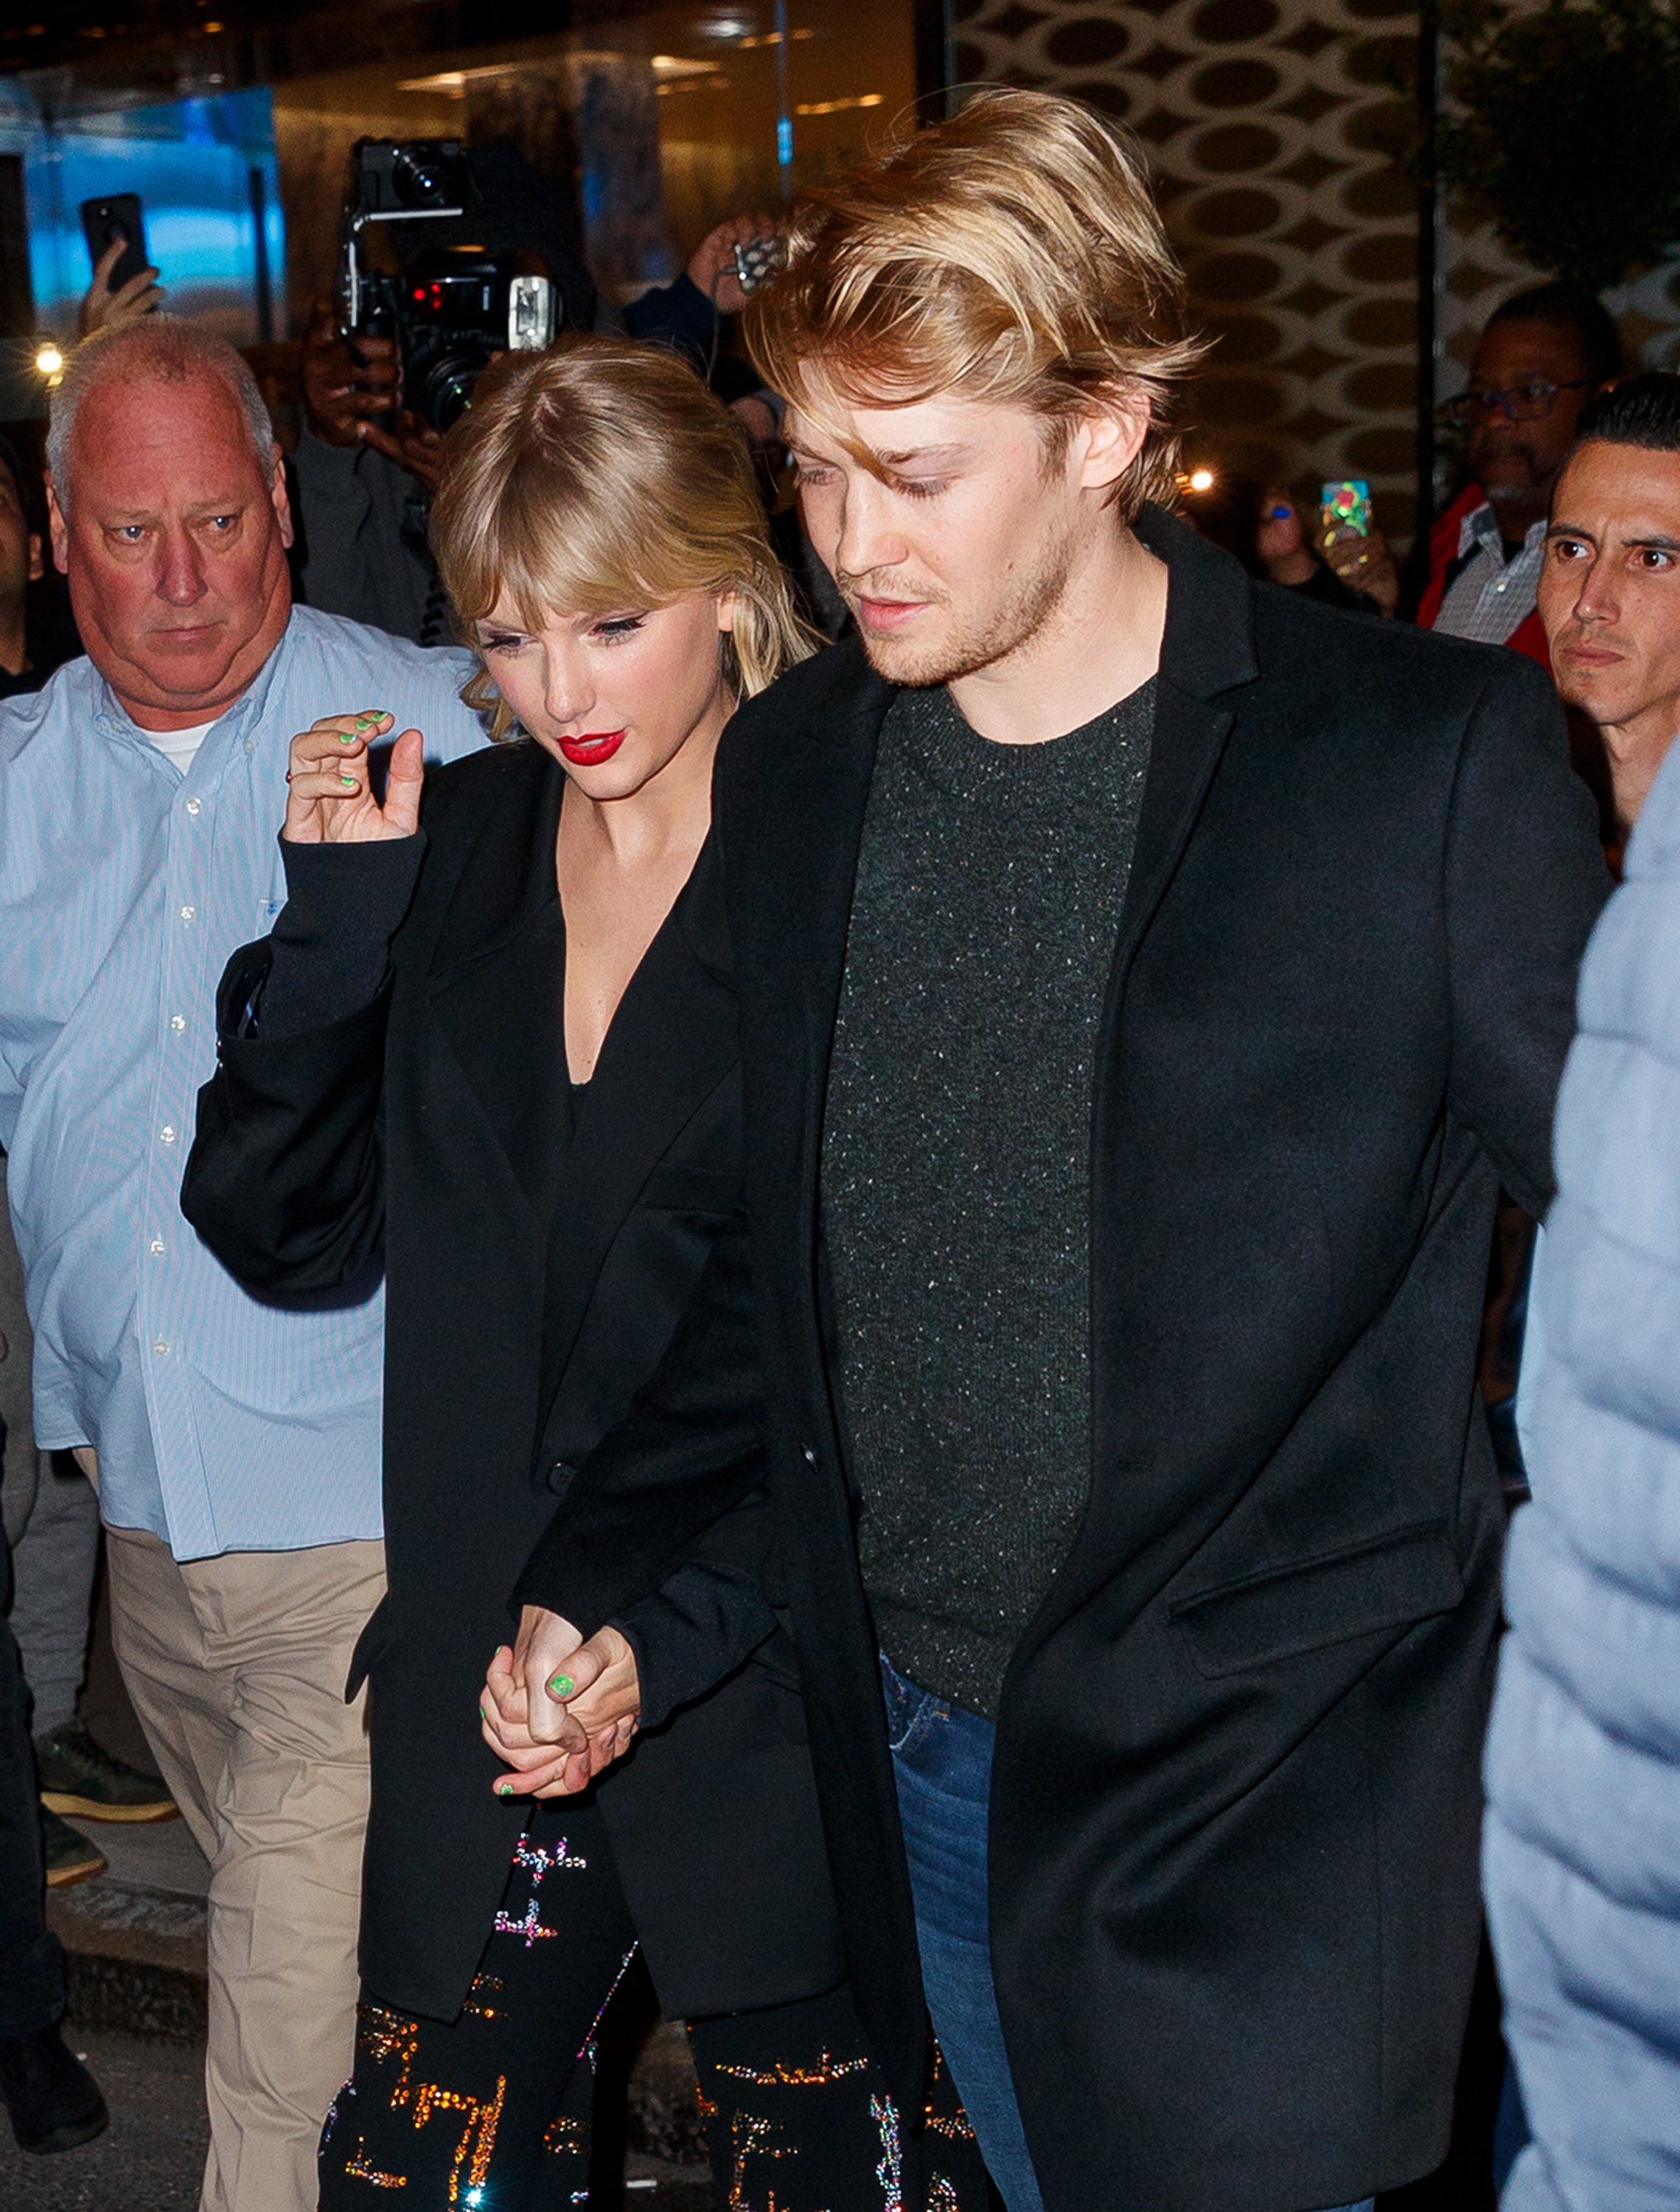 the couple holding hands as they leave a venue